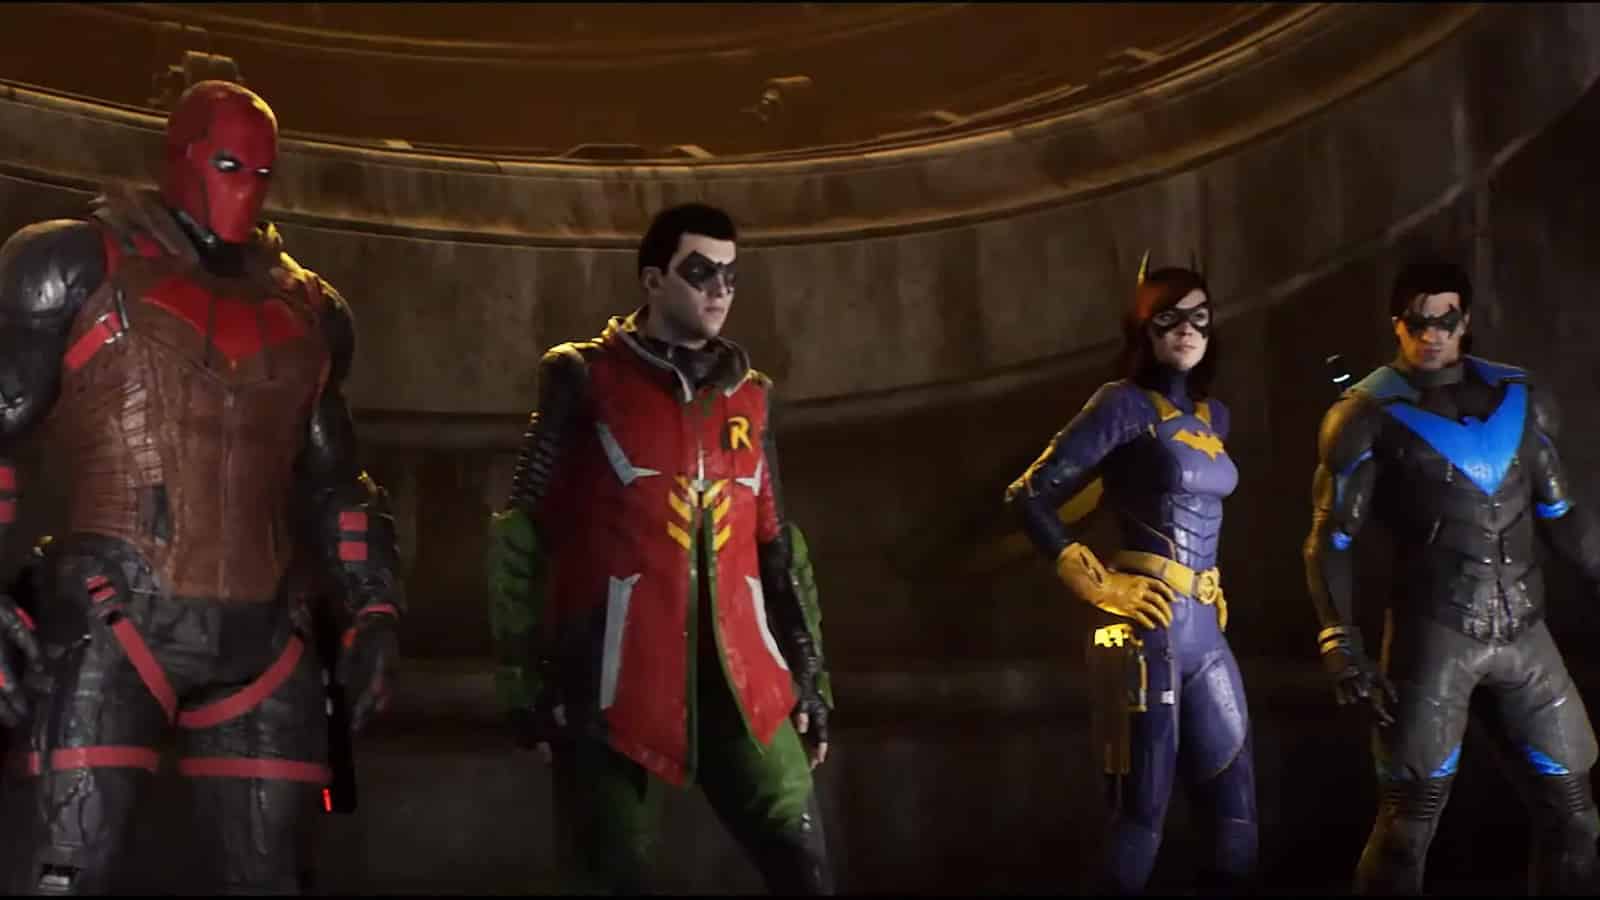 gotham knights robin nightwing batgirl and red hood standing above gotham city